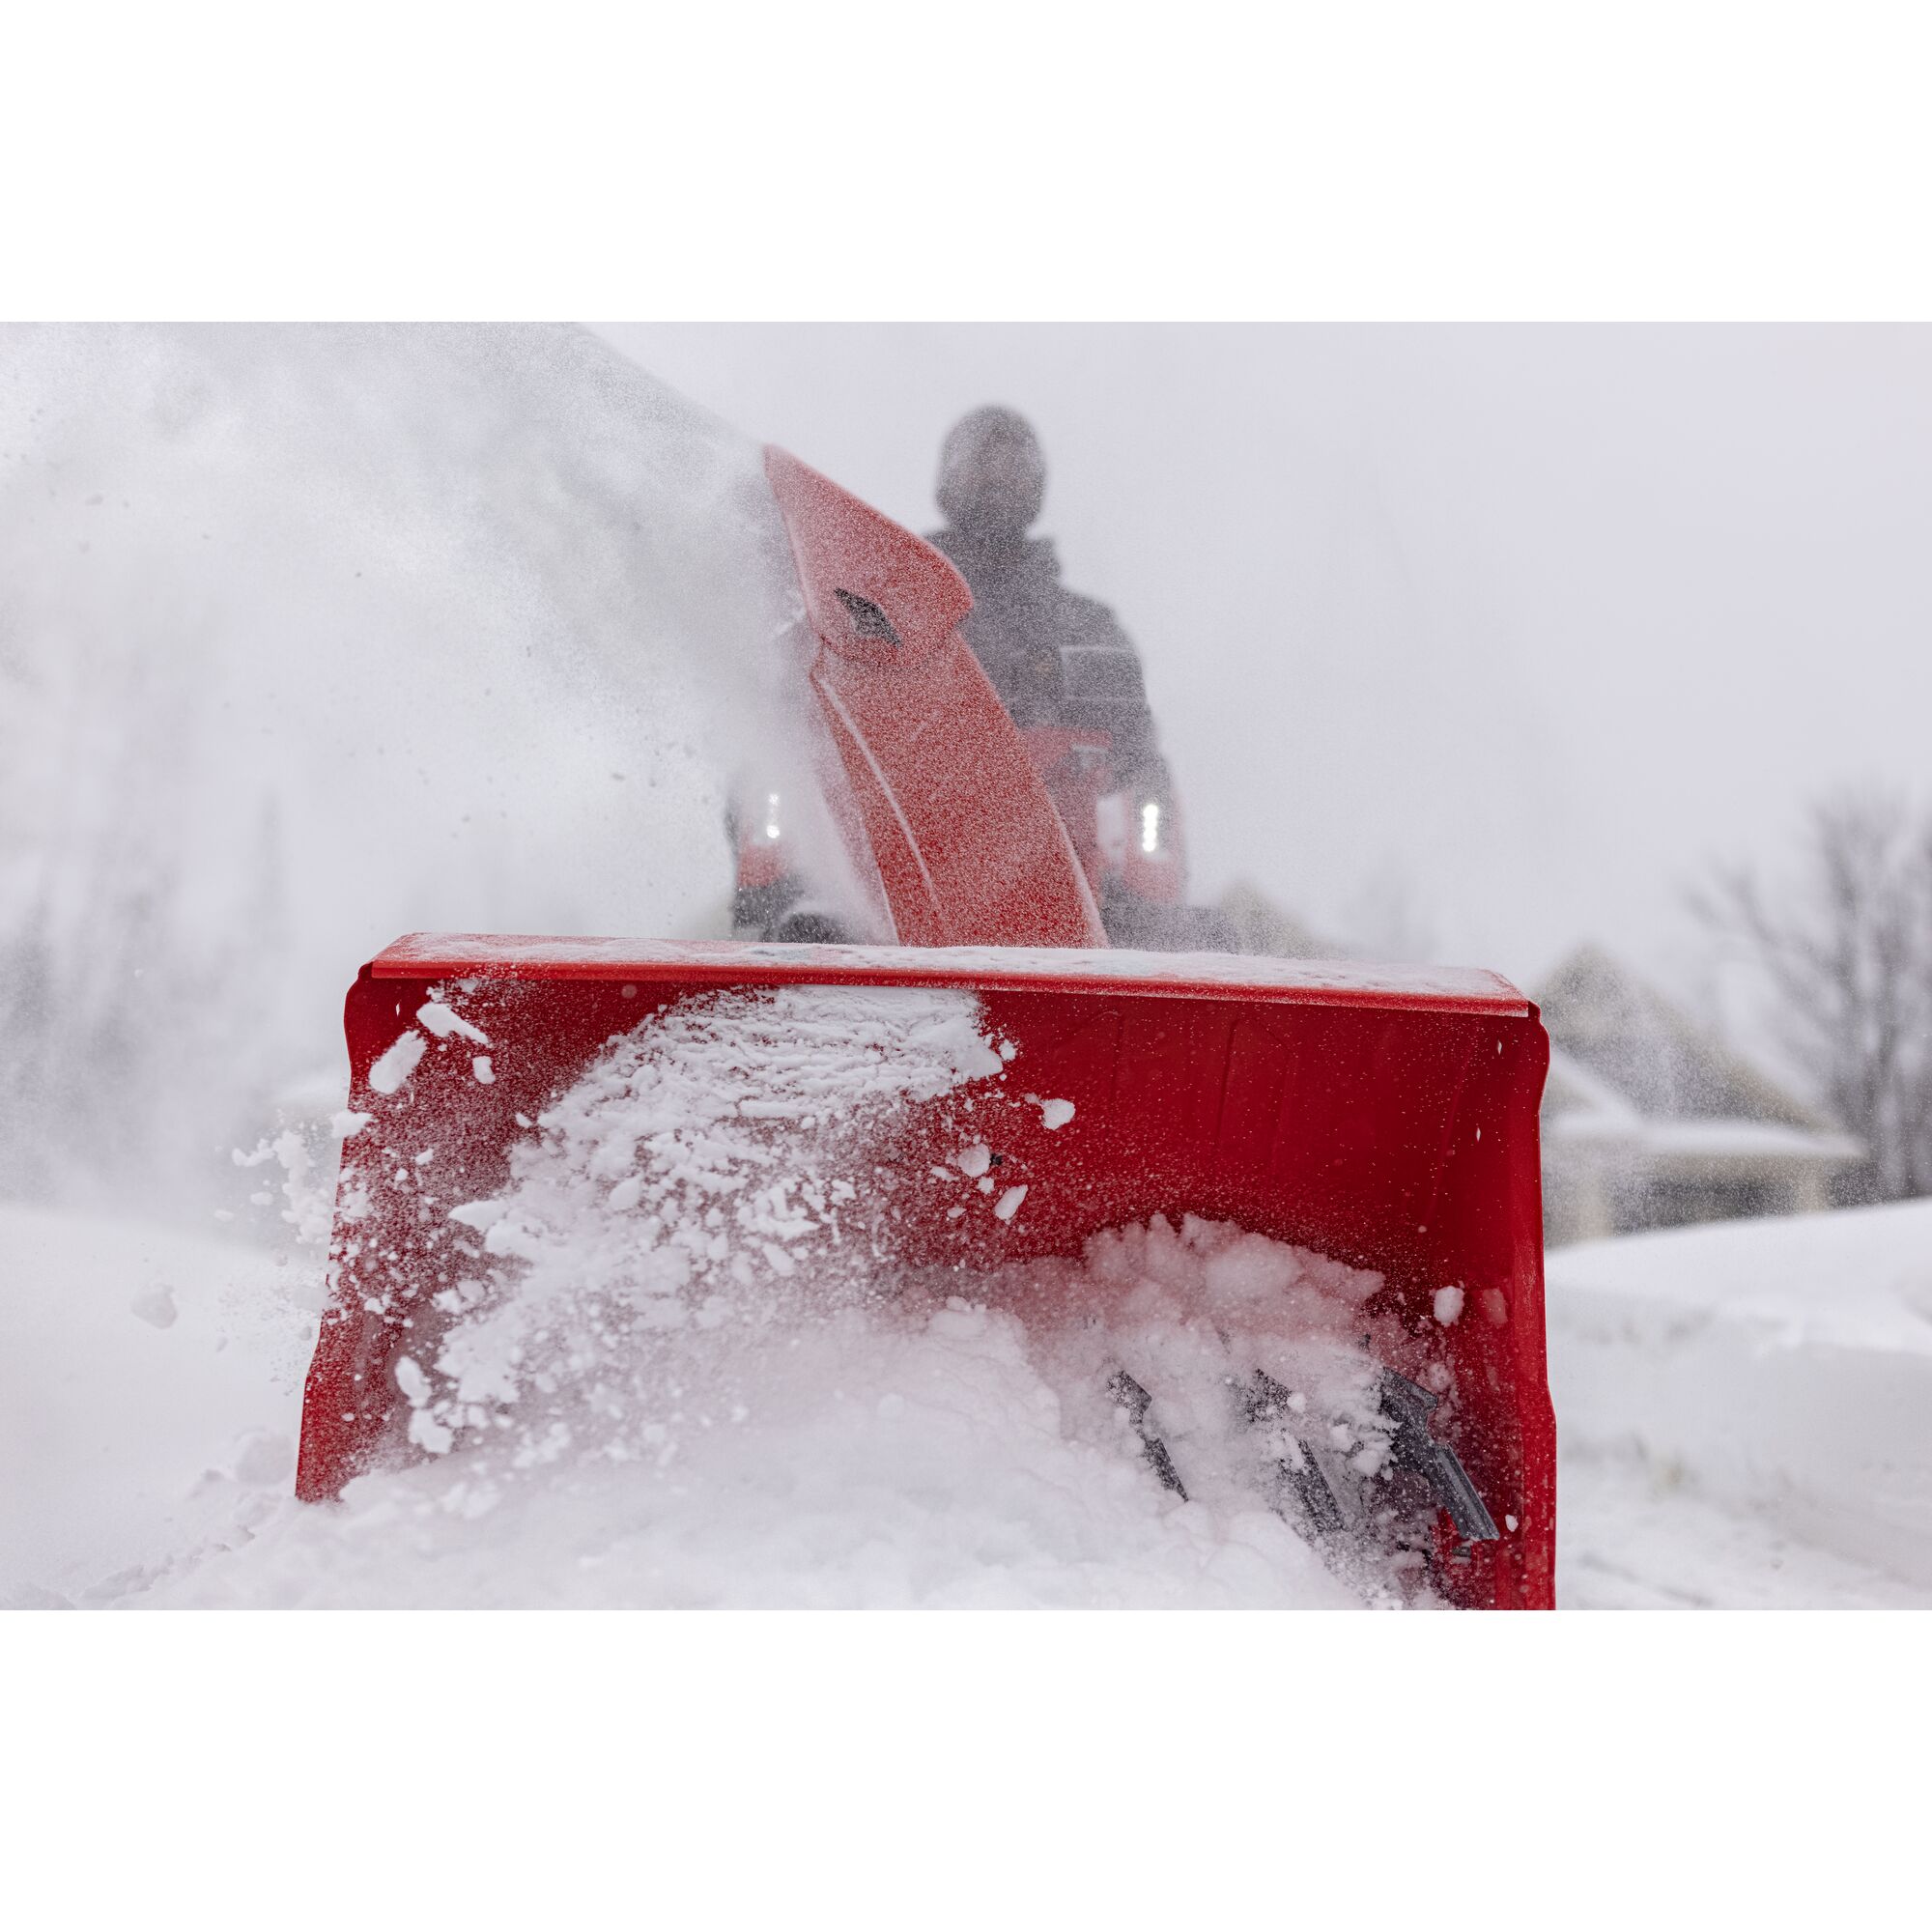 CRAFTSMAN Performance 30 Gas Snow Blower clearing driveway house to the left